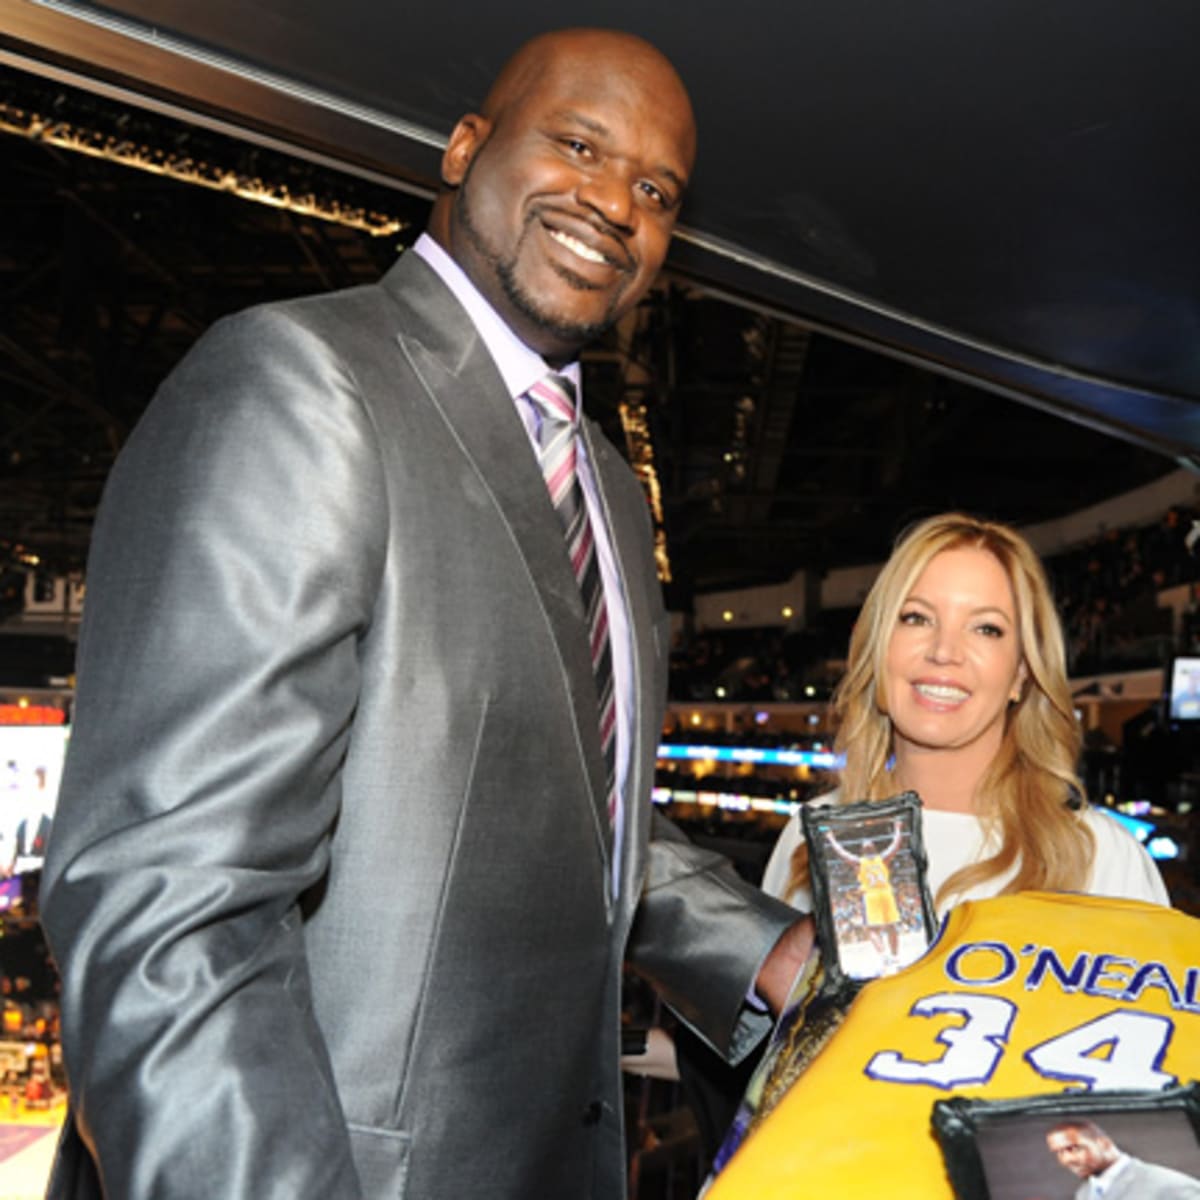 Heat to retire Shaquille O'Neal's jersey on Thursday